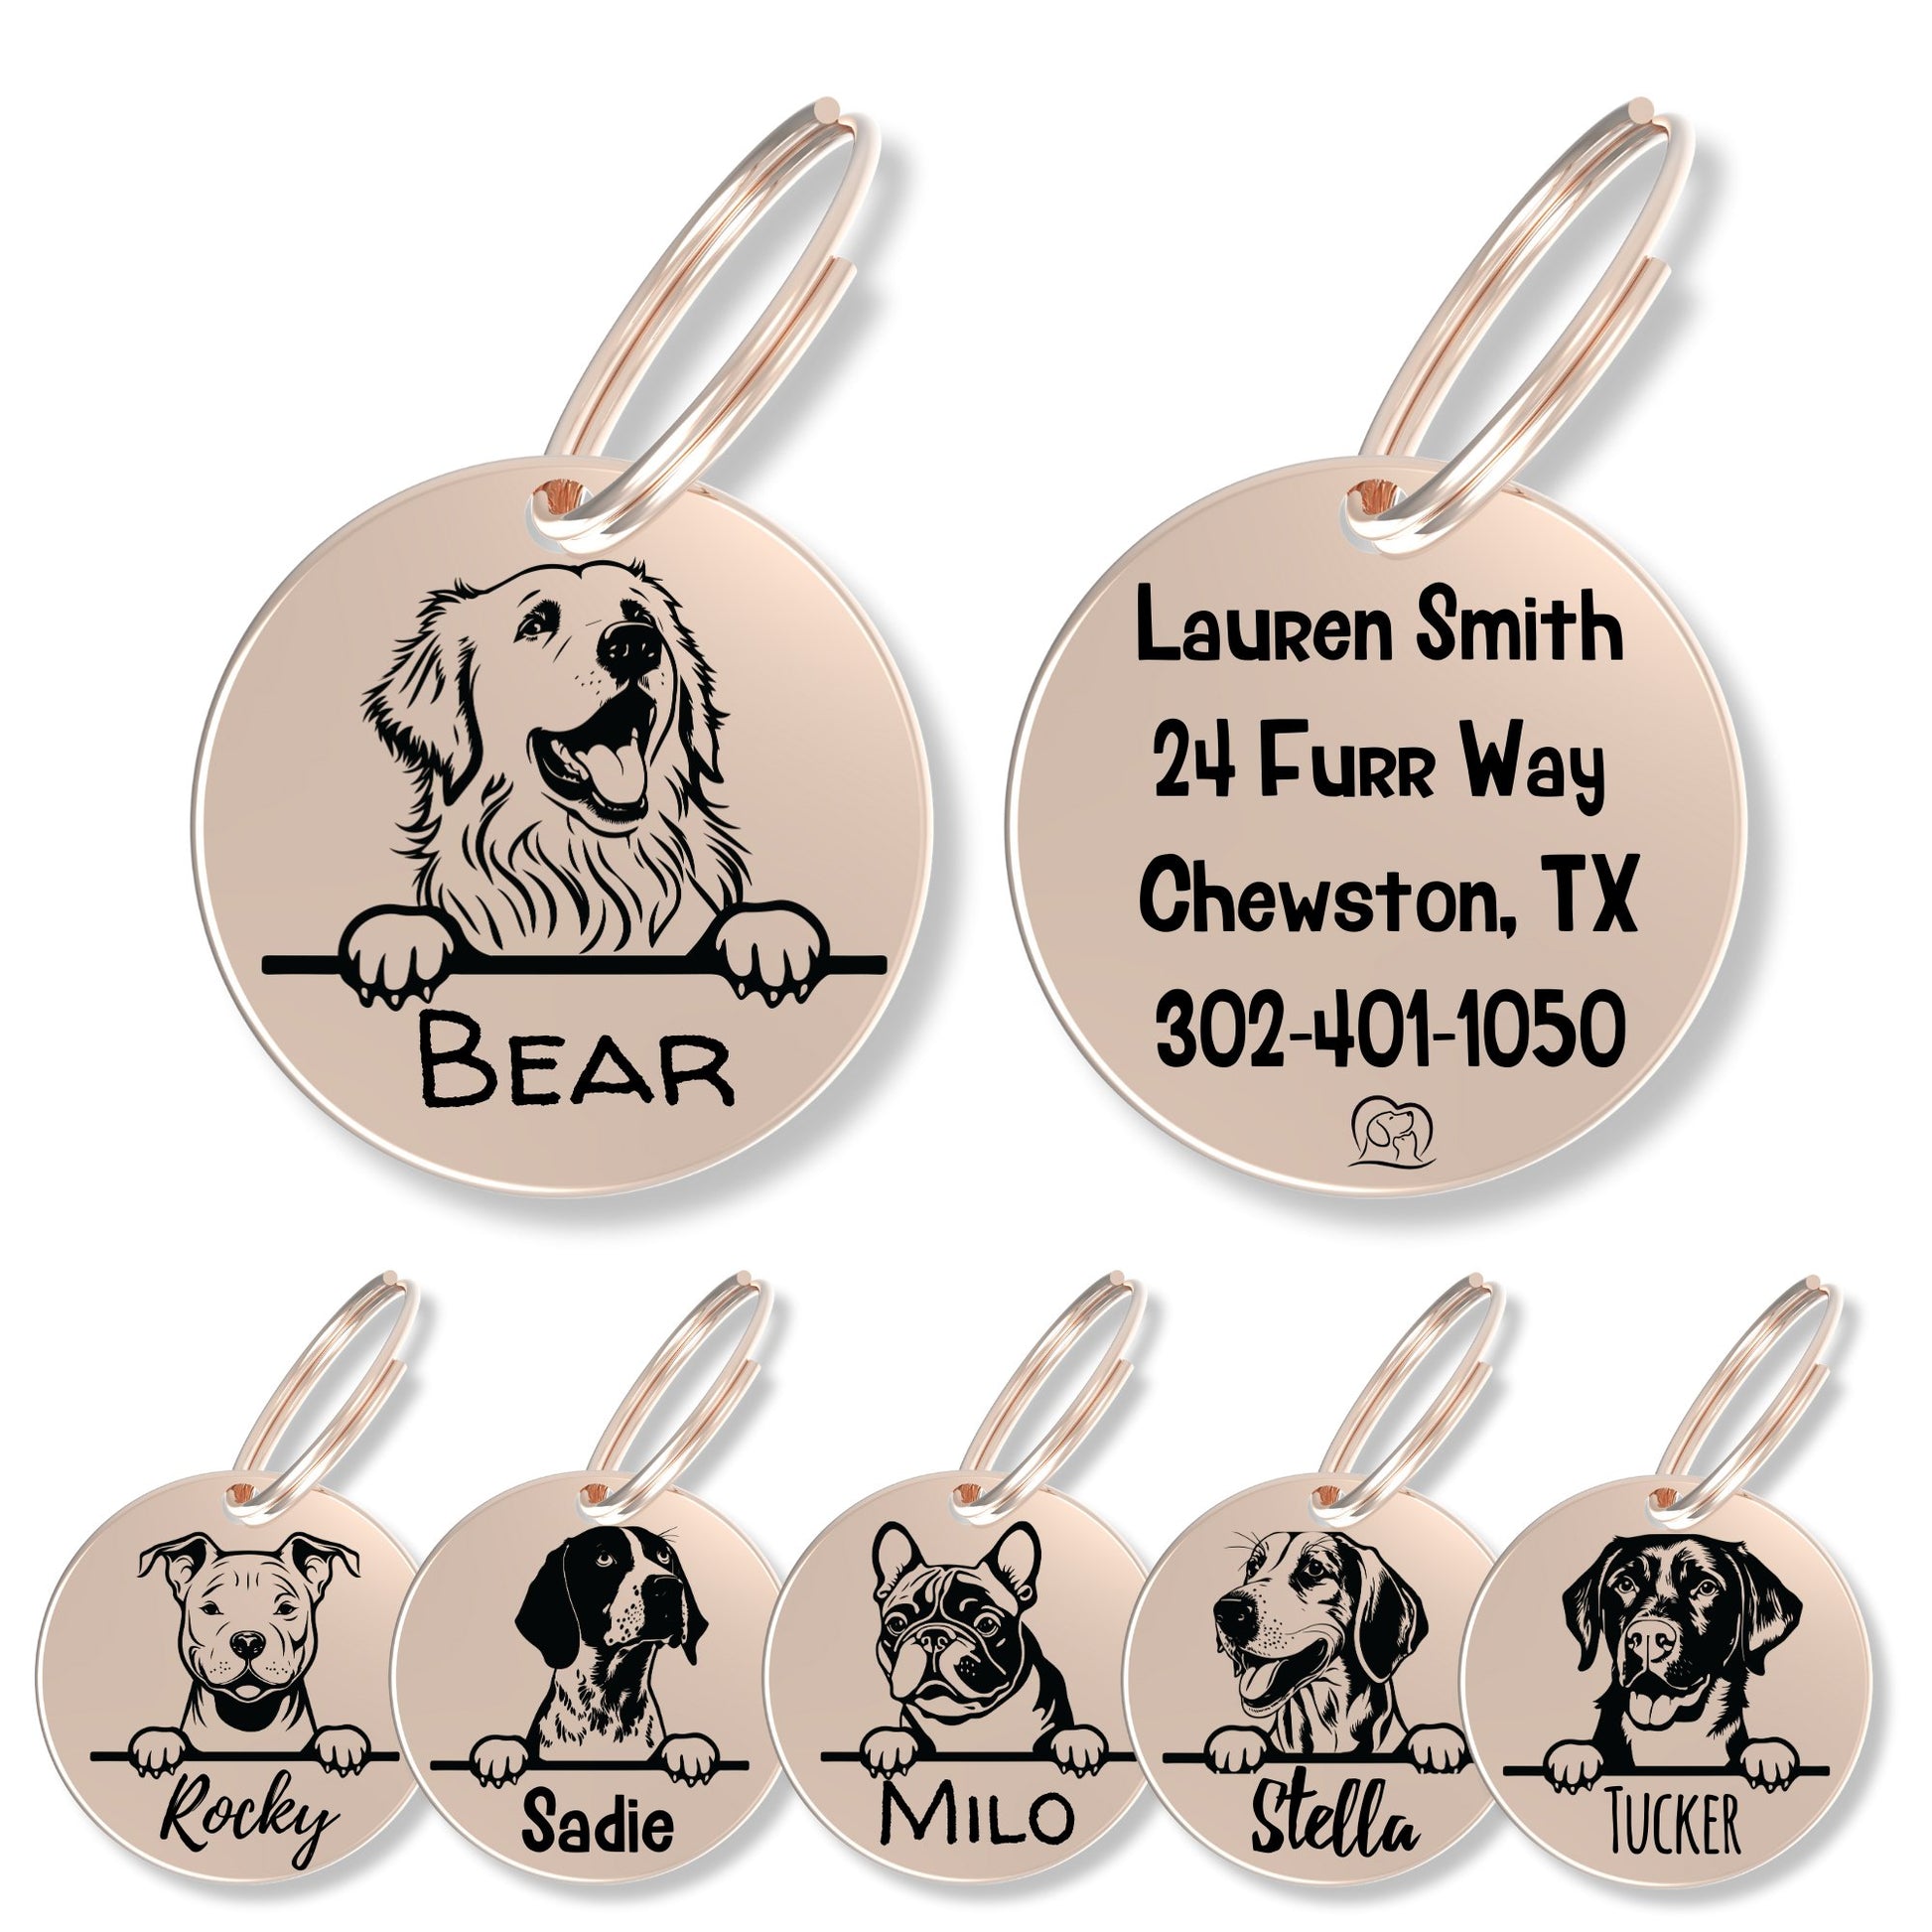 Breed Dog Tag - Personalized Breed Dog Tag (Pyrenean Mountai)